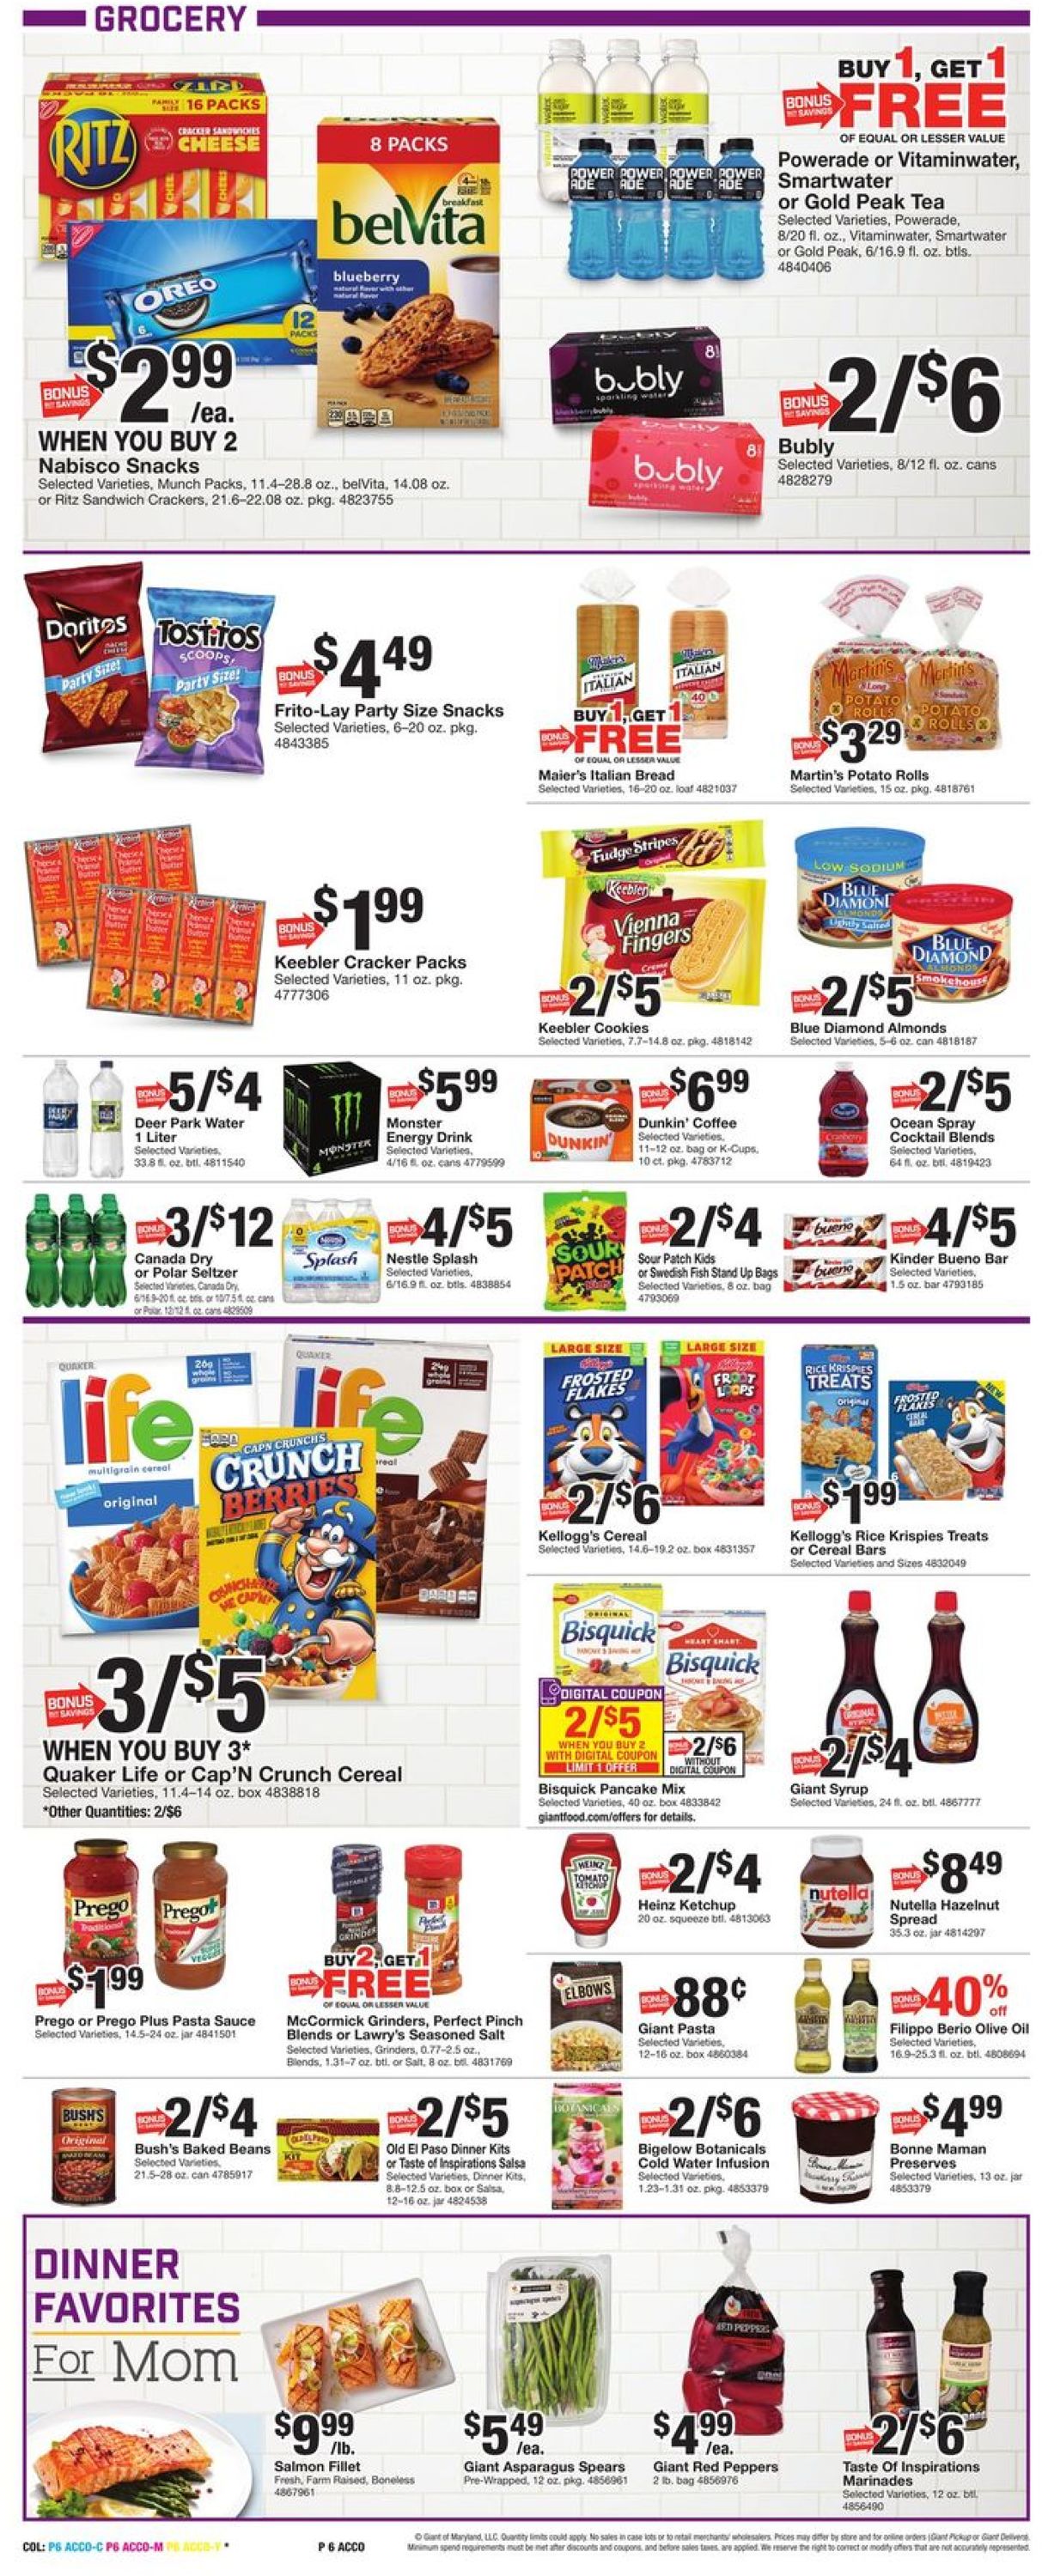 Giant Food Current weekly ad 05/07 - 05/13/2021 [10] - frequent-ads.com